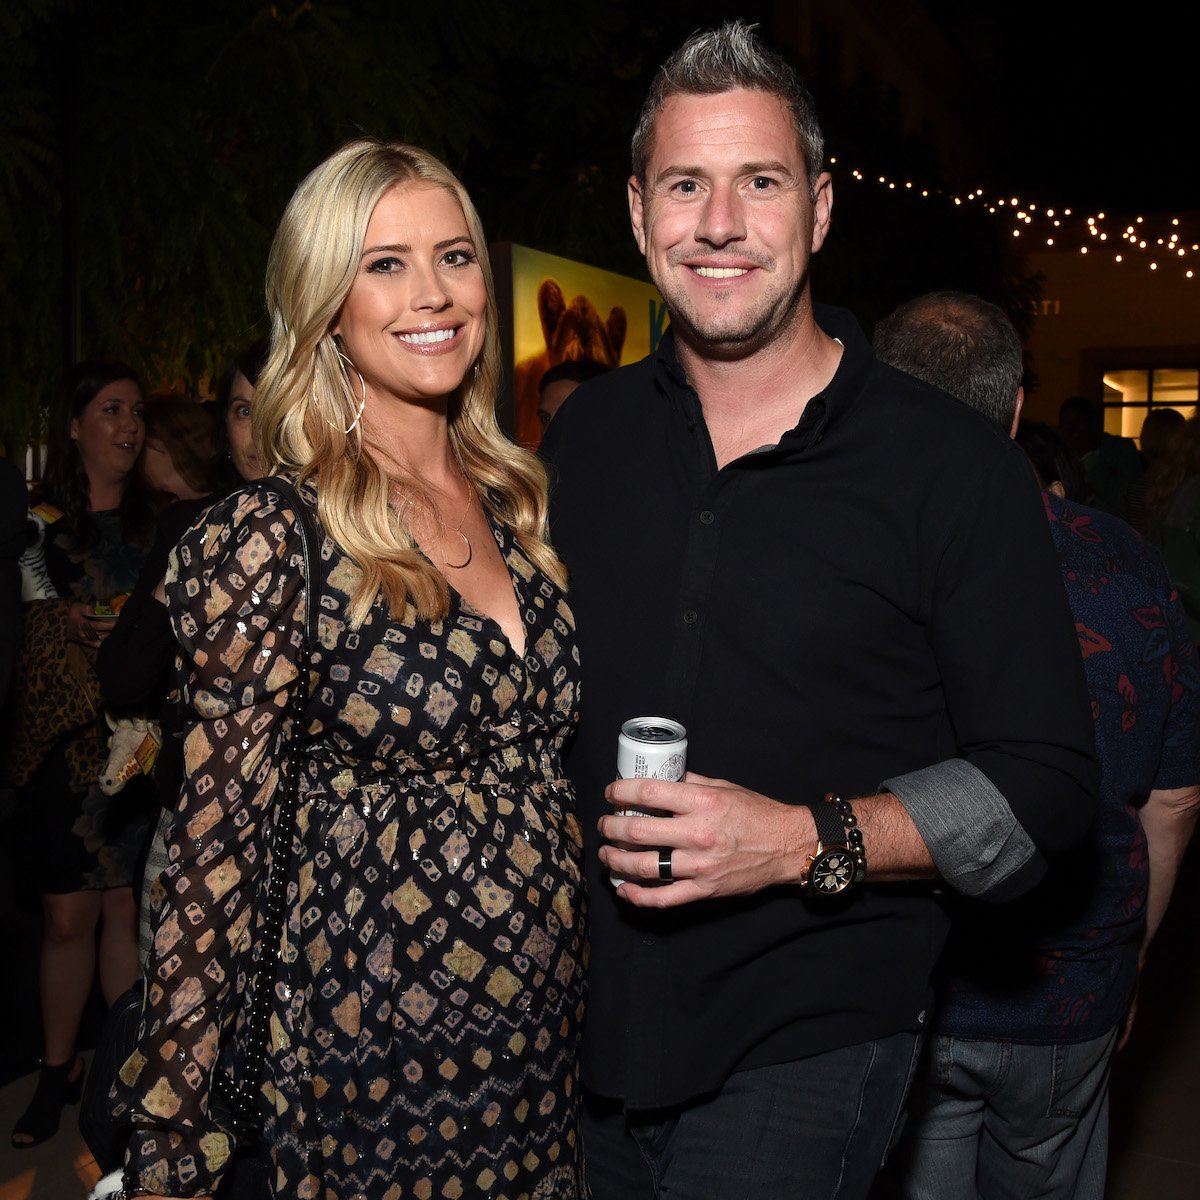 Christina Hall and Ant Anstead, who share one son named Hudson, pose together at an event.